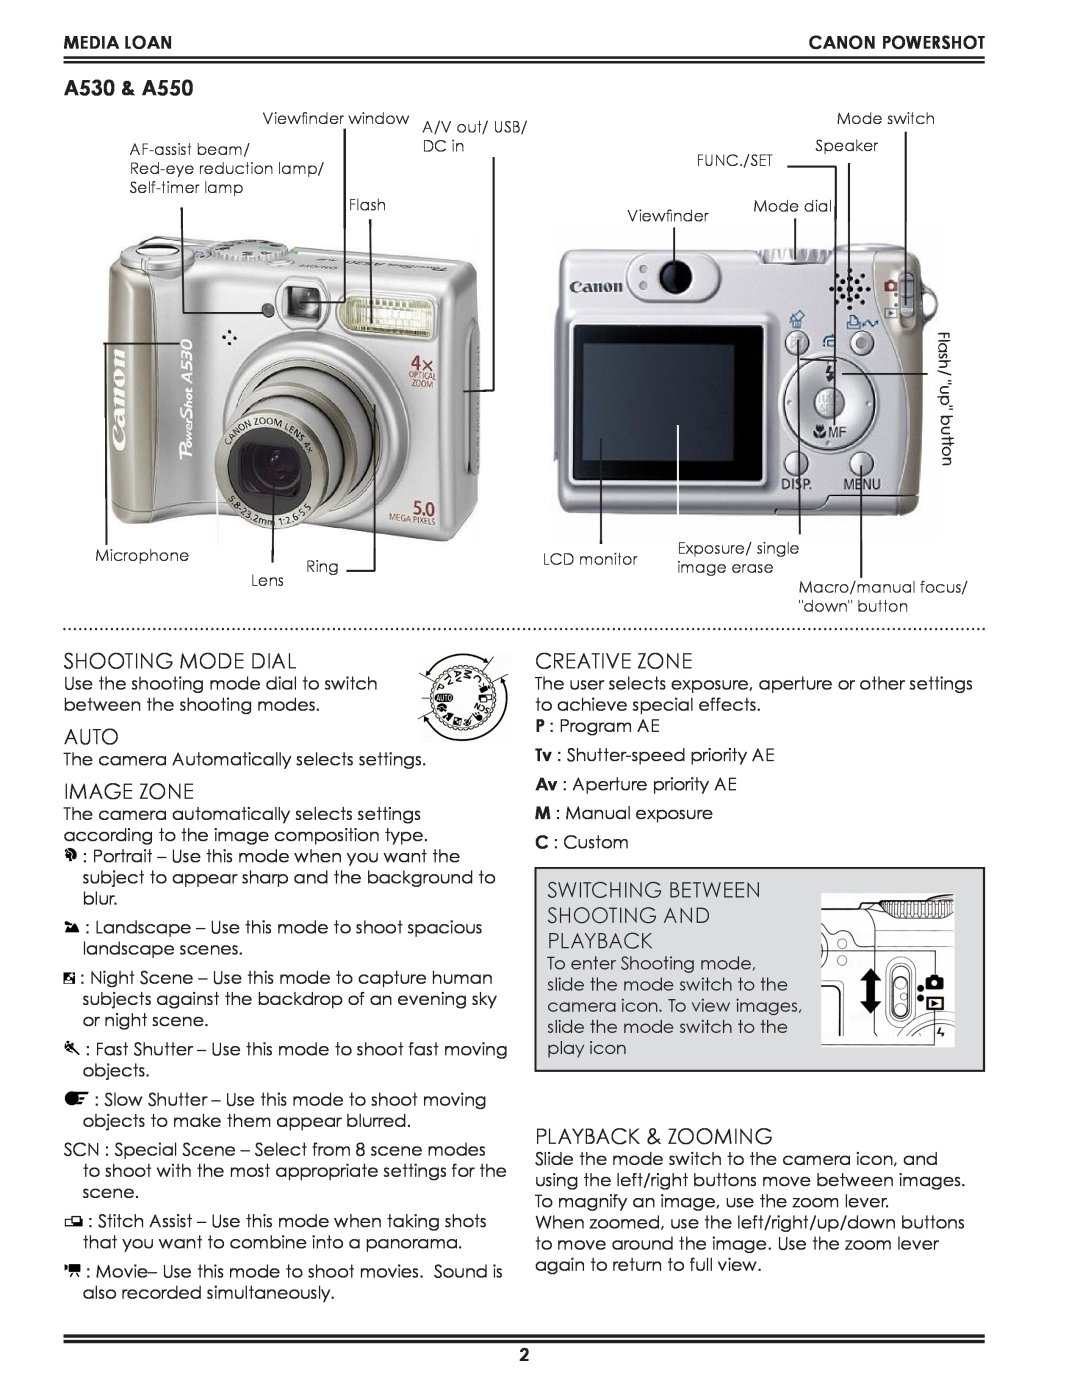 Canon A95 manual A530 & A550, Shooting Mode Dial, Auto, Image zone, Creative Zone, Switching between Shooting and Playback 